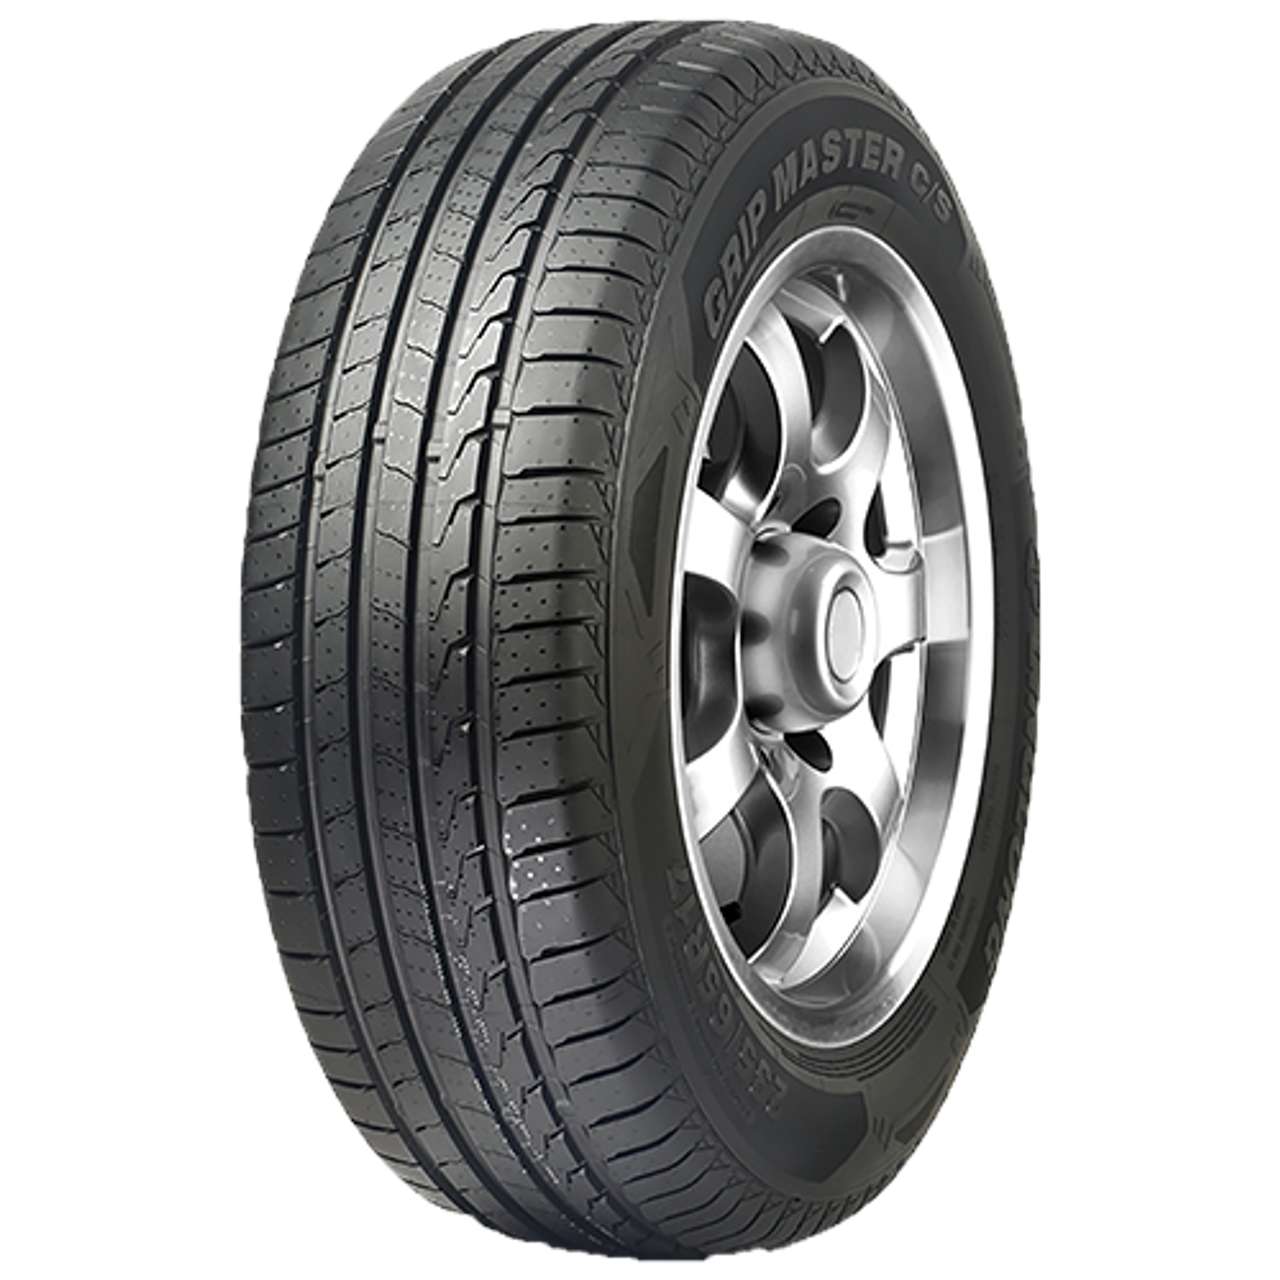 LINGLONG GRIP MASTER C/S 235/55R18 104W BSW XL